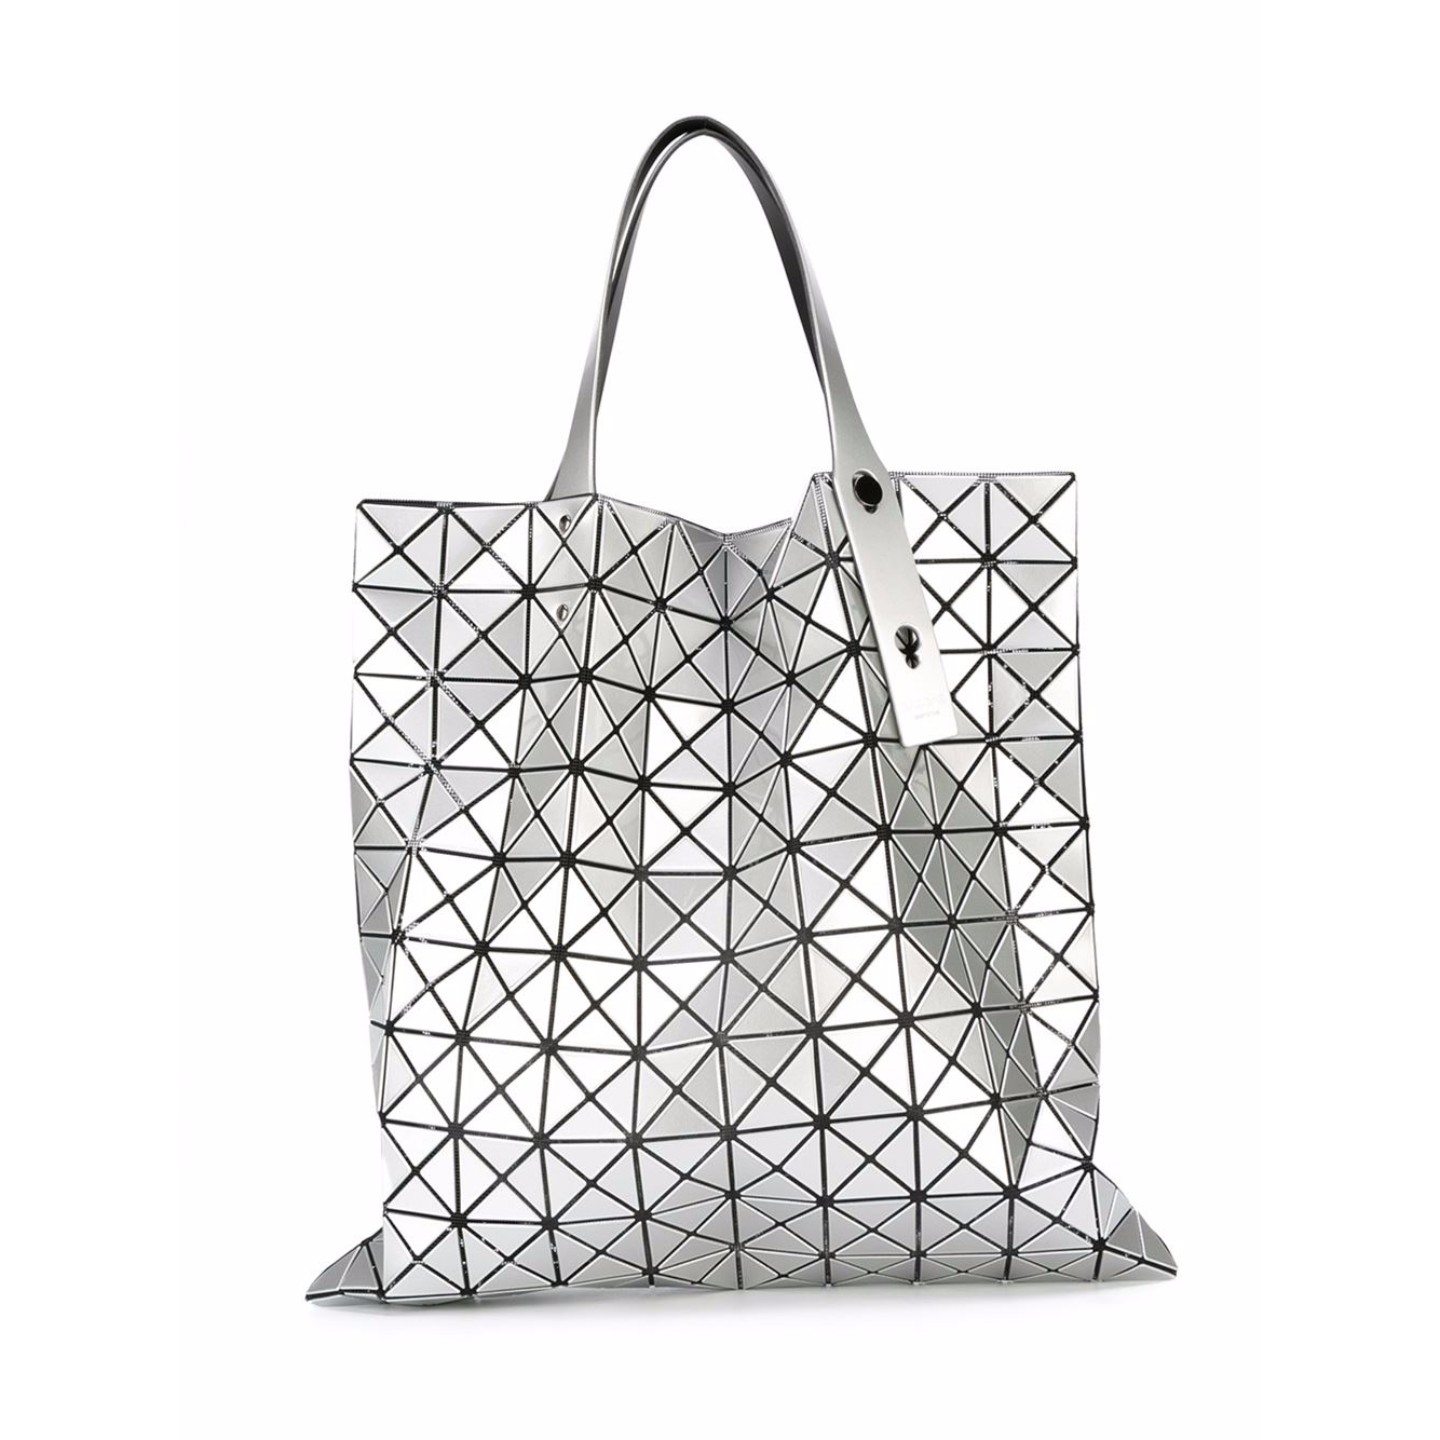 Issey Miyake Bao Bao Prism Tote, Silver - LabelCentric